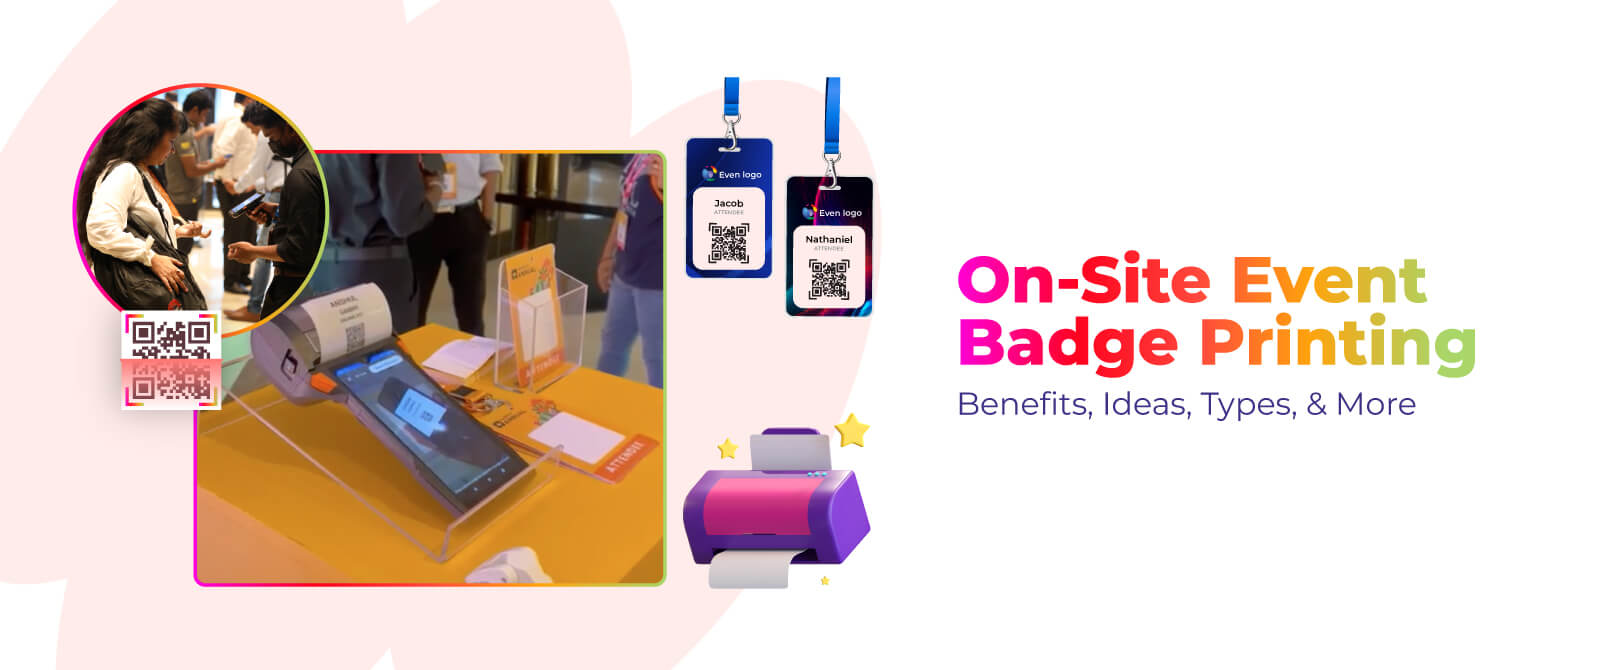 On-Site Event Badge Printing: Benefits, Ideas, Types, & More